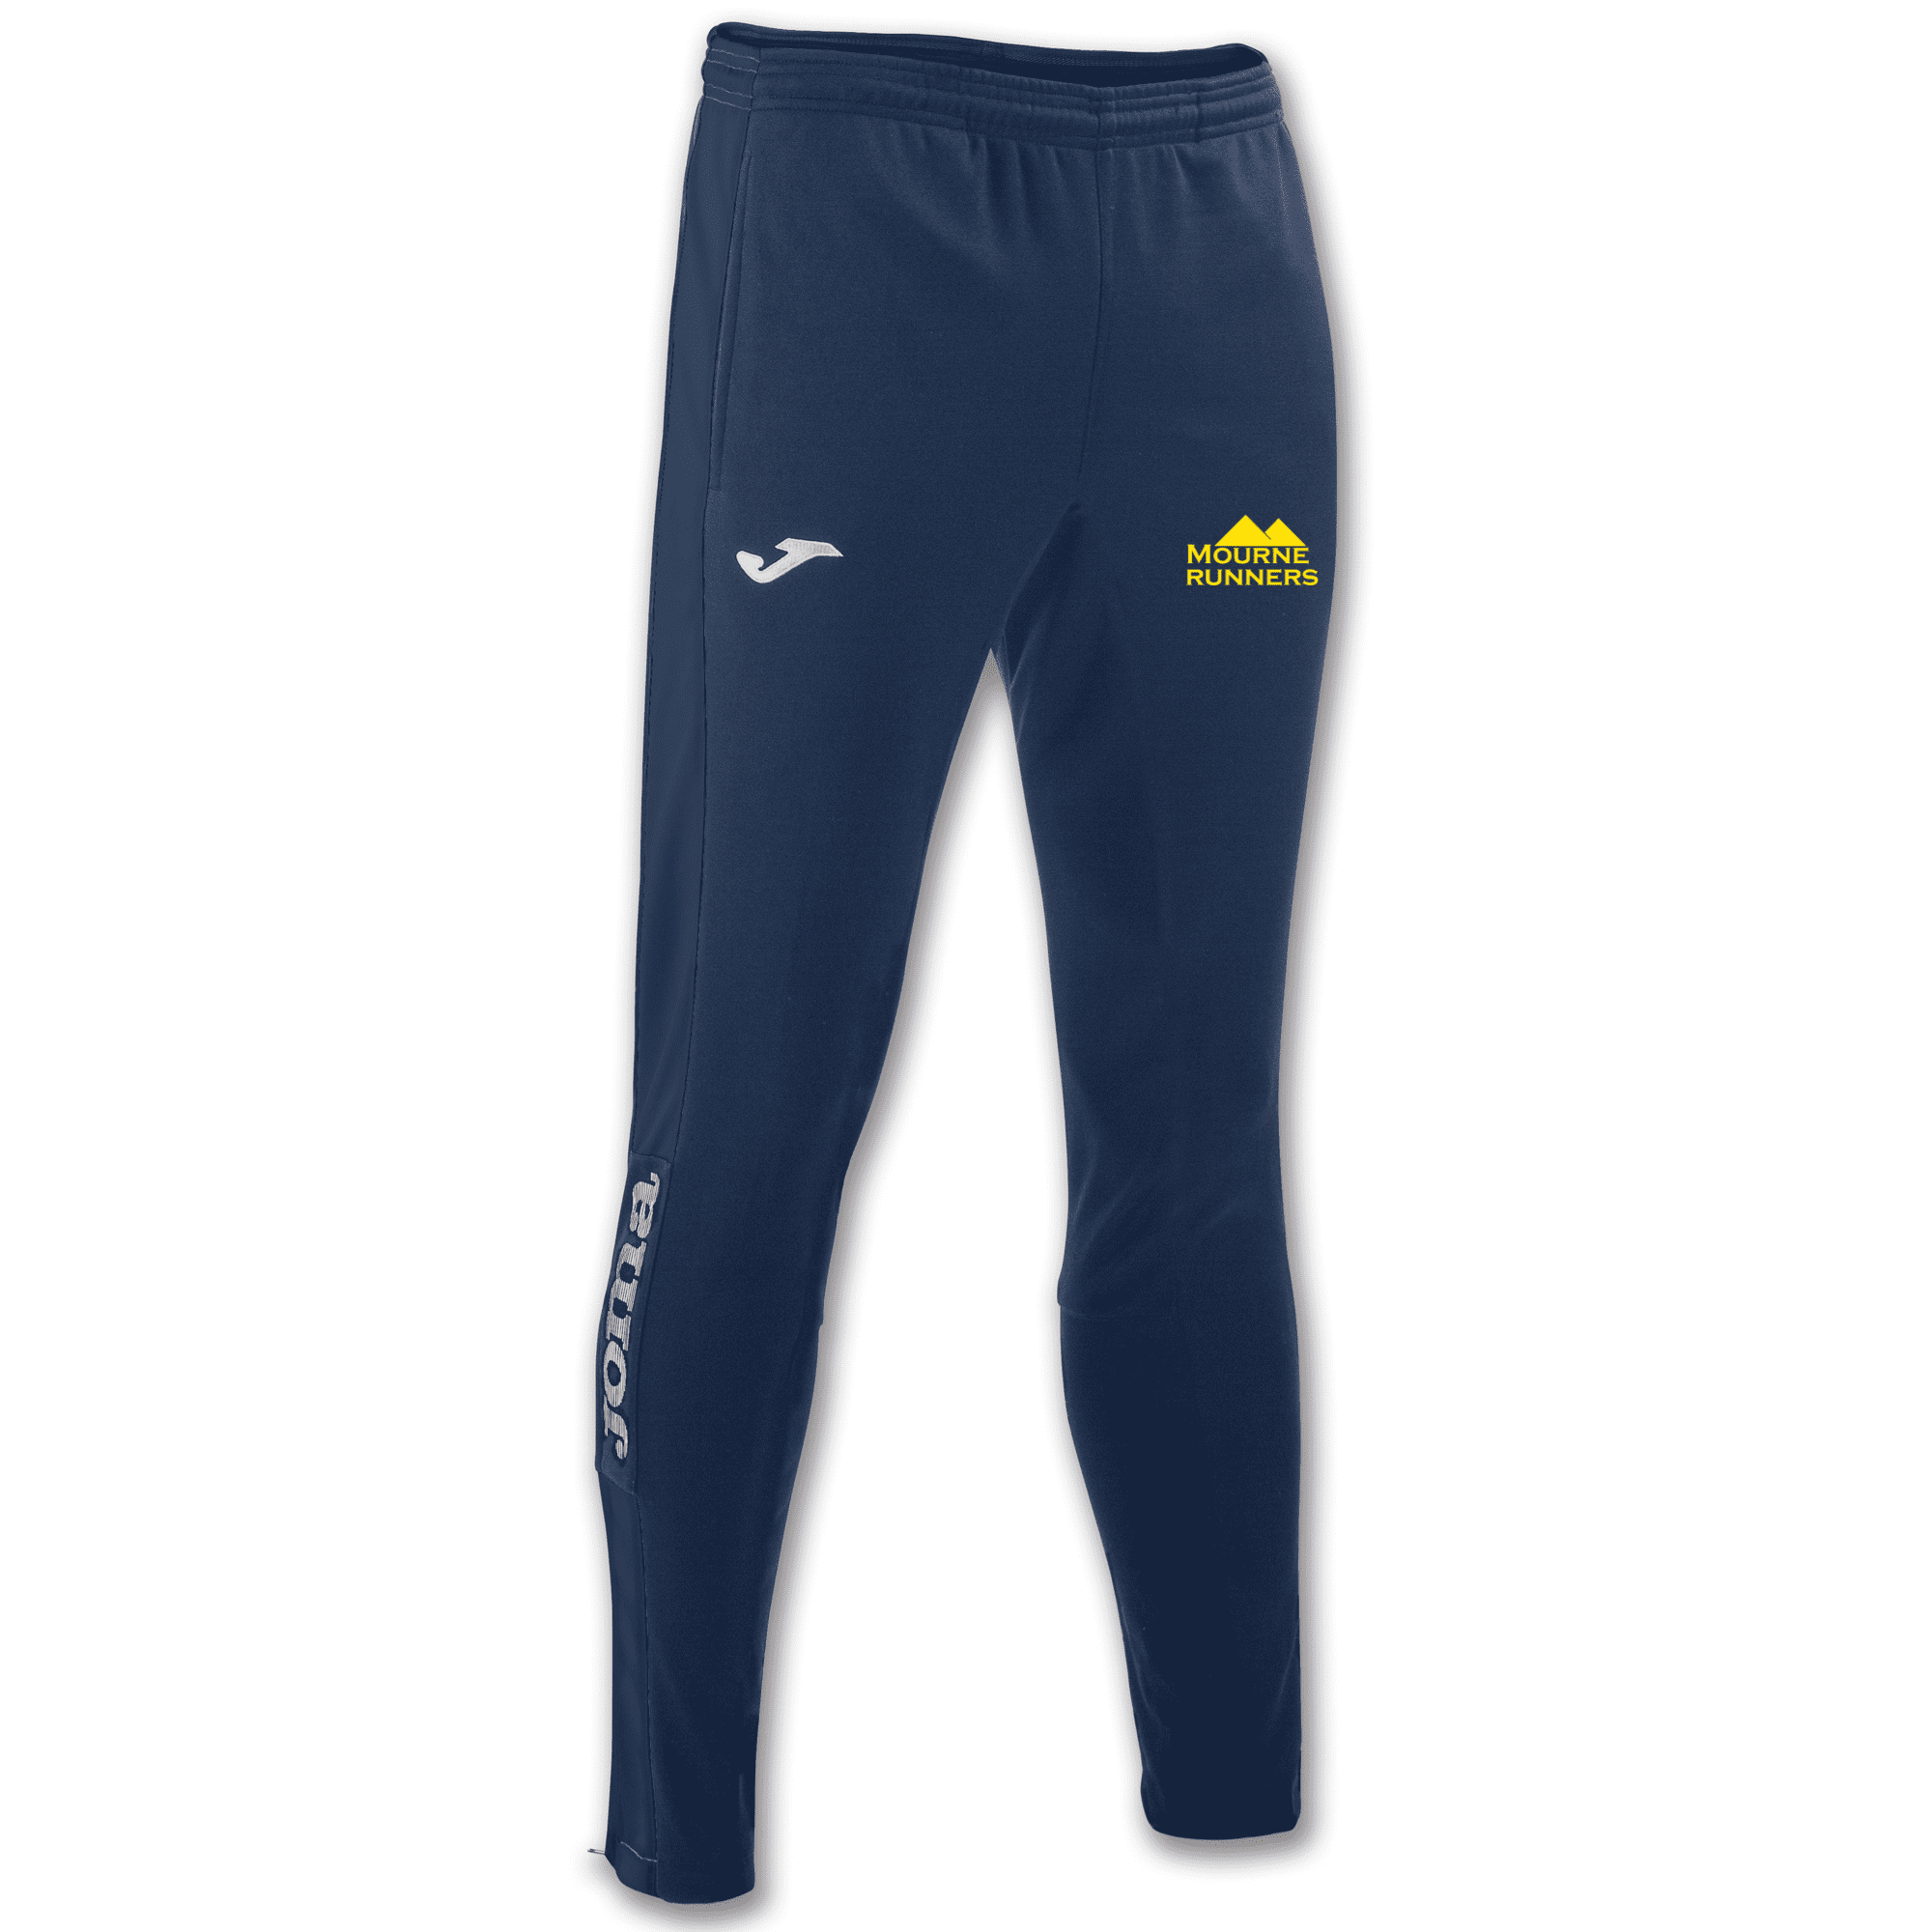 Mourne Runners Joma Combi Gold Trackpants